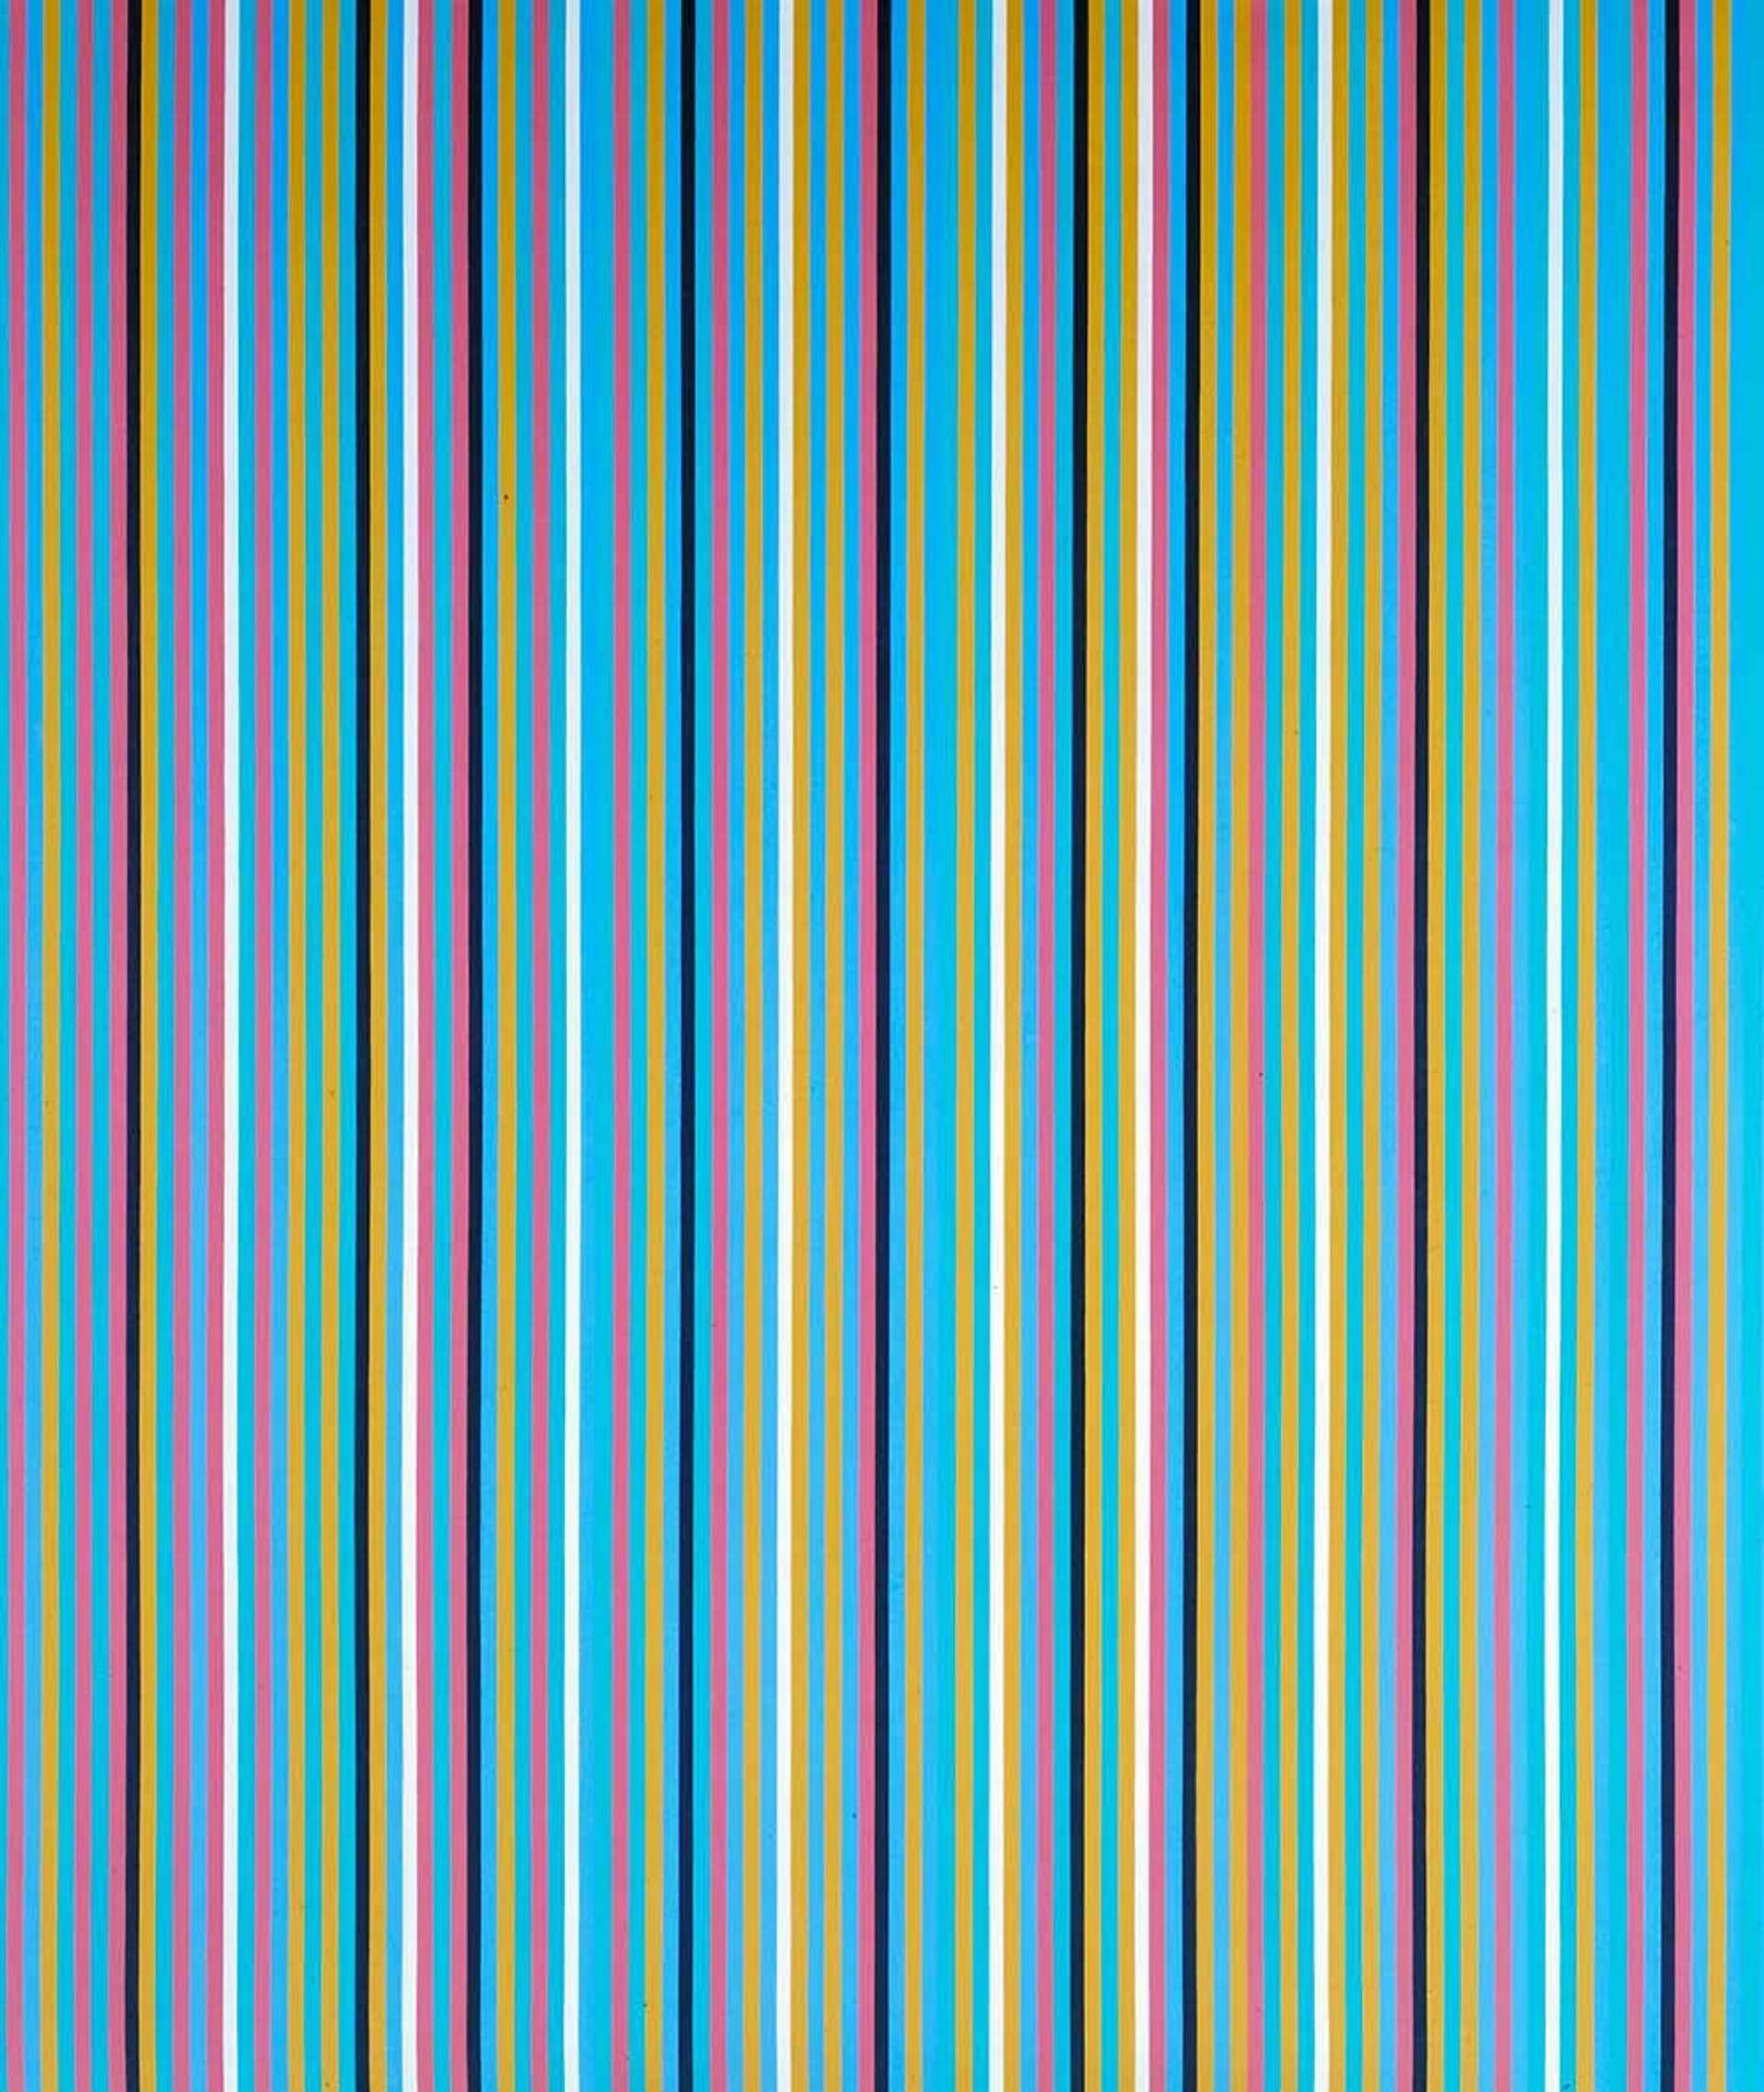 Achæan, like the other Riley works featuring stripes, is to be read horizontally across the bands of colour. Riley regarded the shades in this work as a breakthrough in that they provided the optical effect she sought after and are brighter, purer colours in comparison to the ones she had used previously.